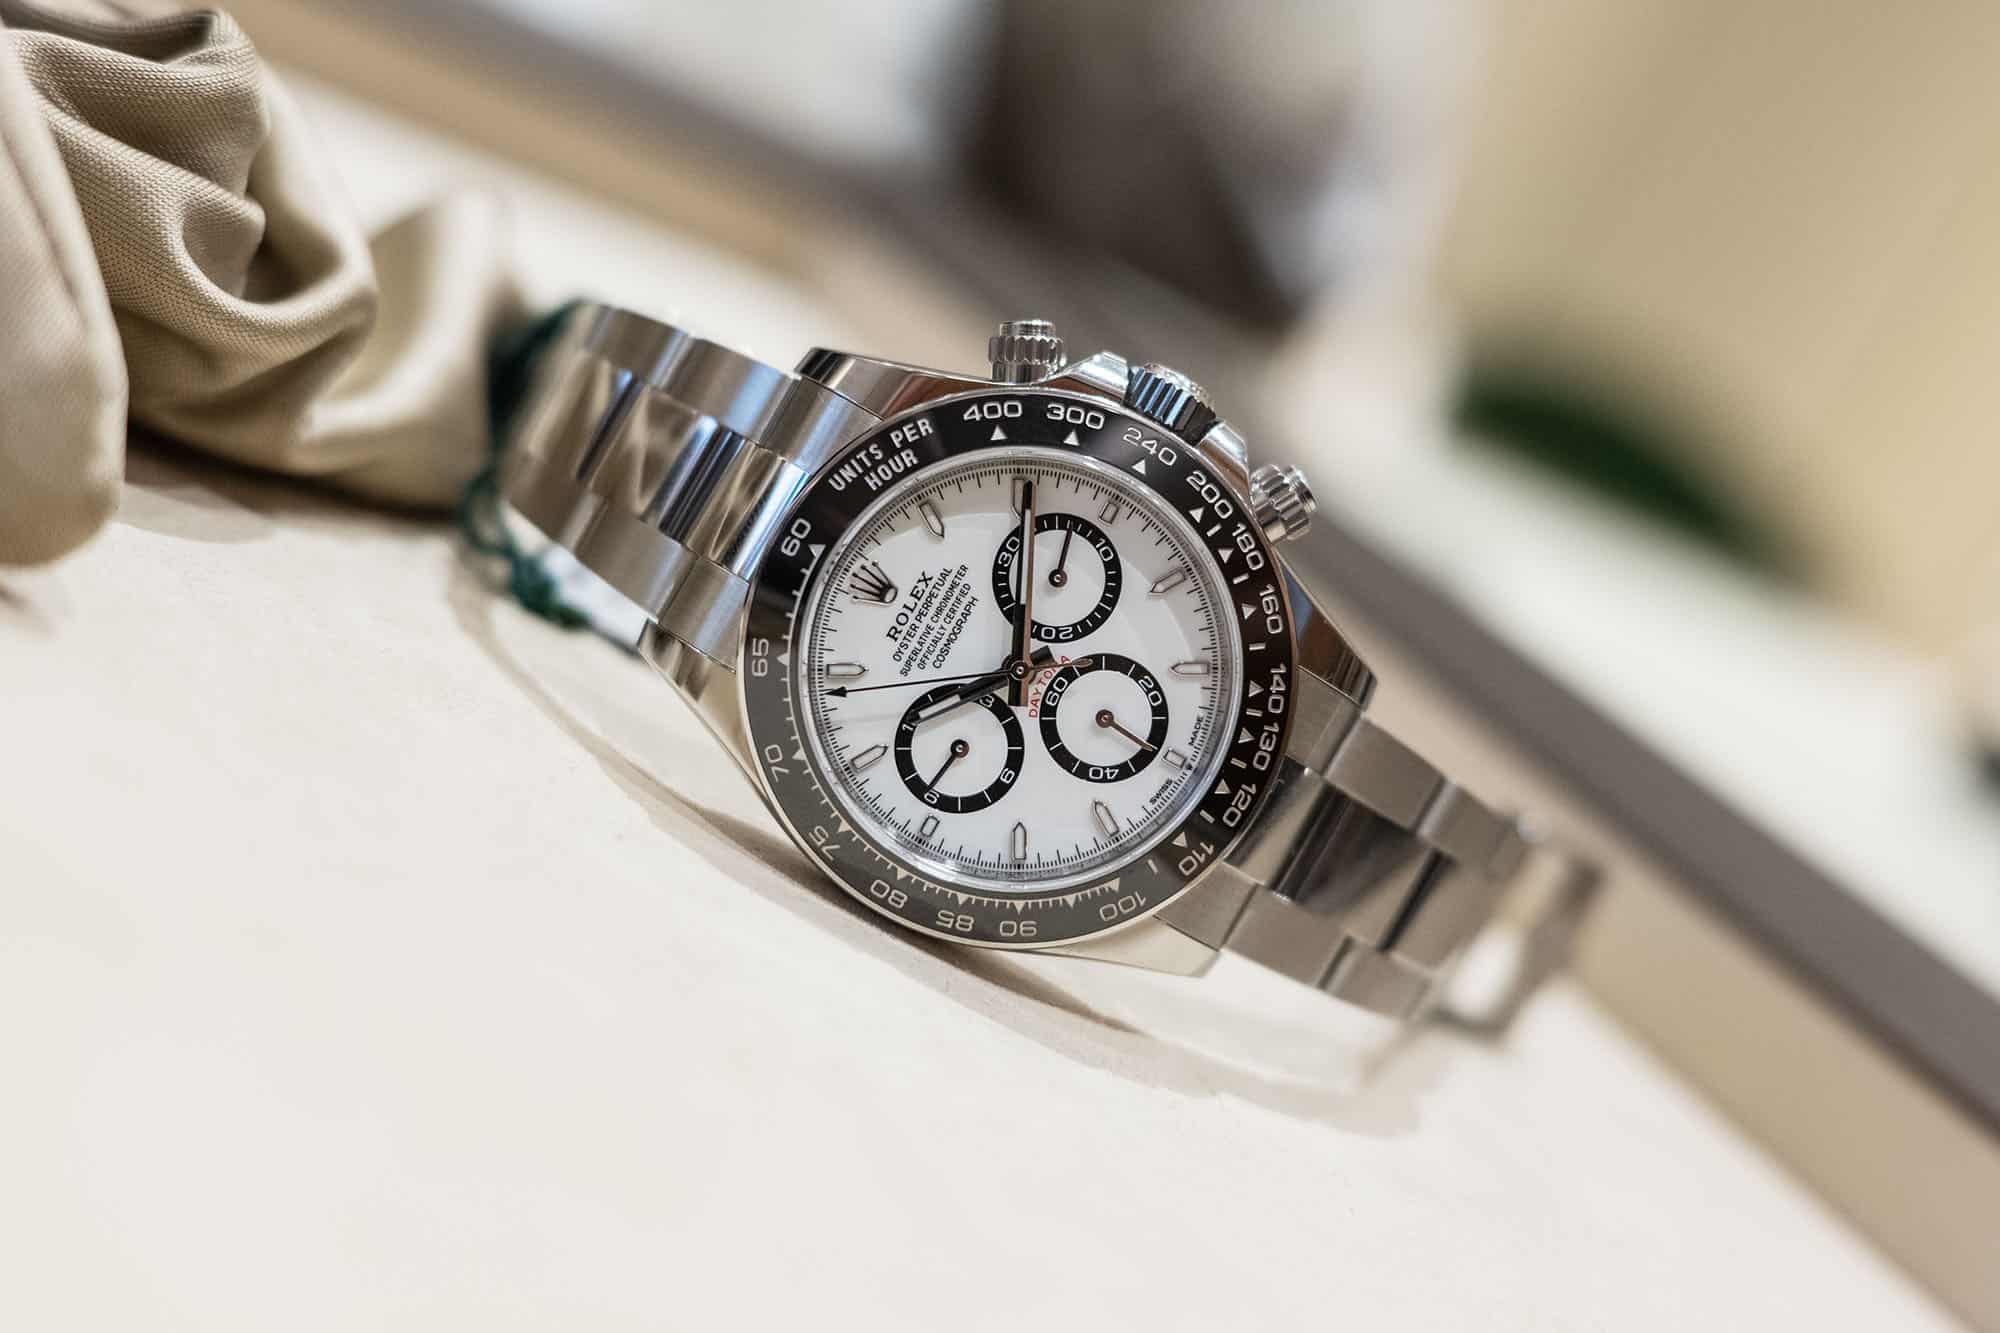 Hands-On With the New Rolex Daytona - Worn &